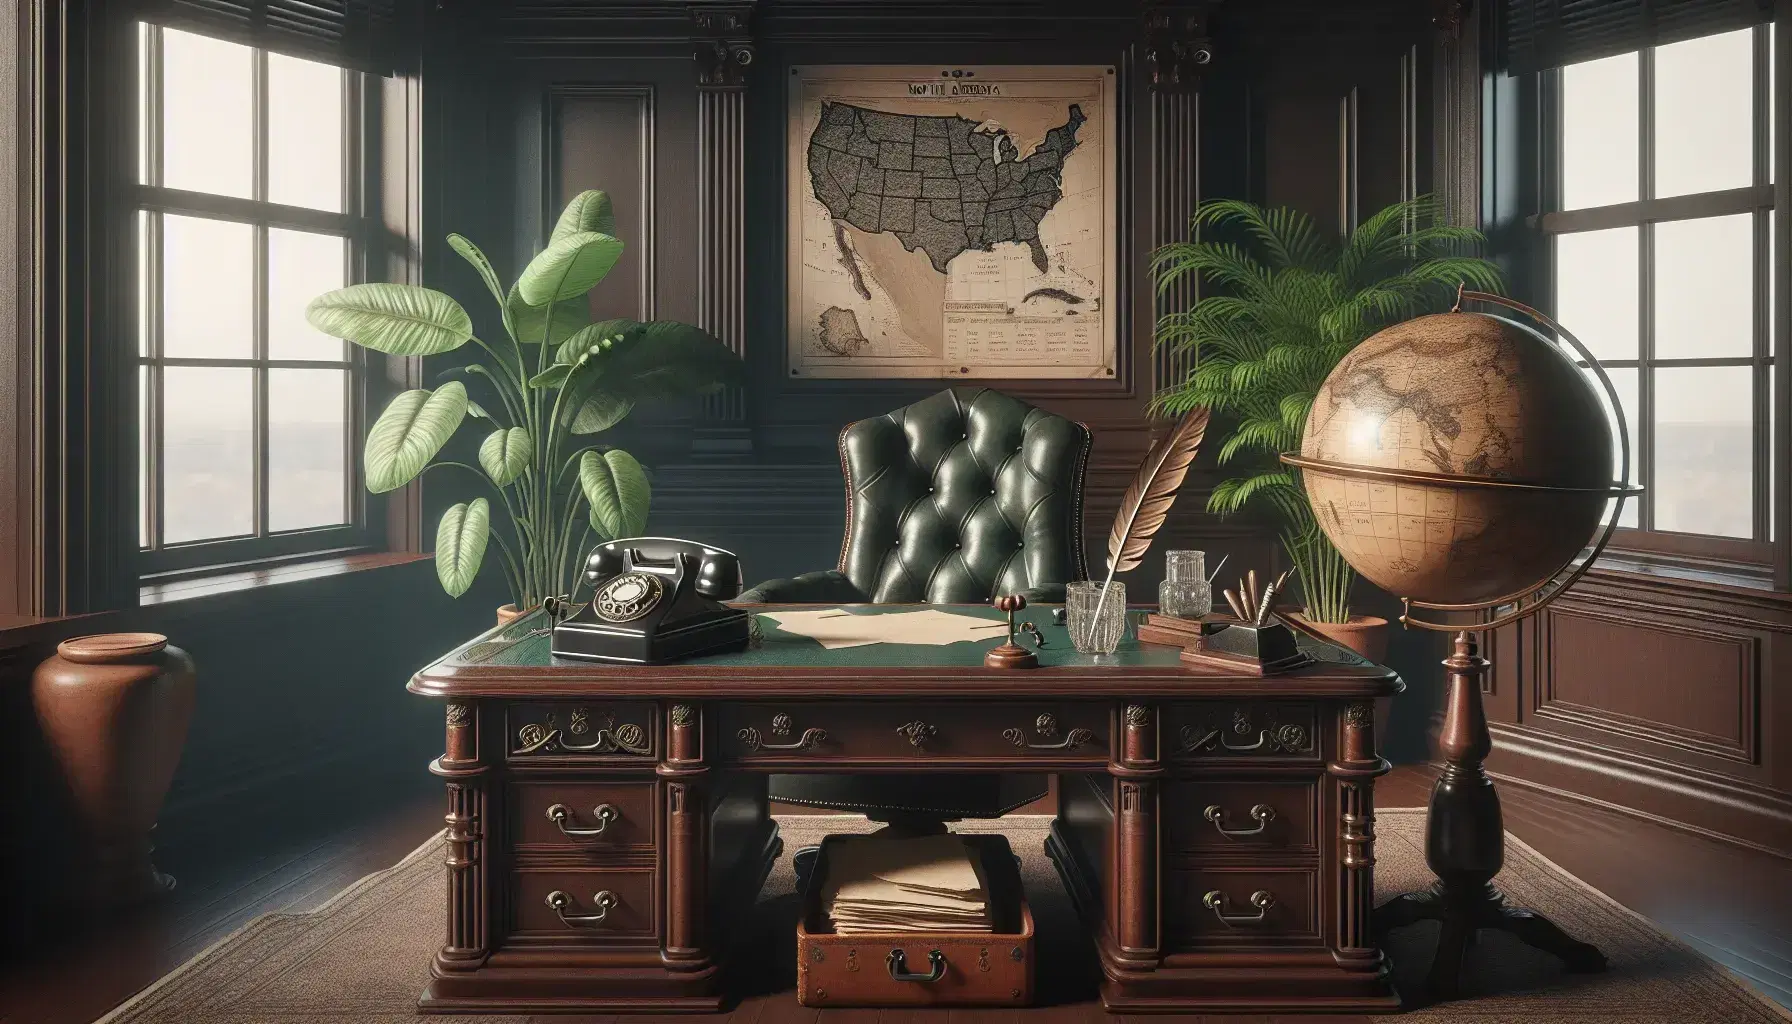 Early 20th-century office with ornate mahogany desk, black rotary phone, inkwell with quill, leather chair, globe, and potted plant by paneled windows.